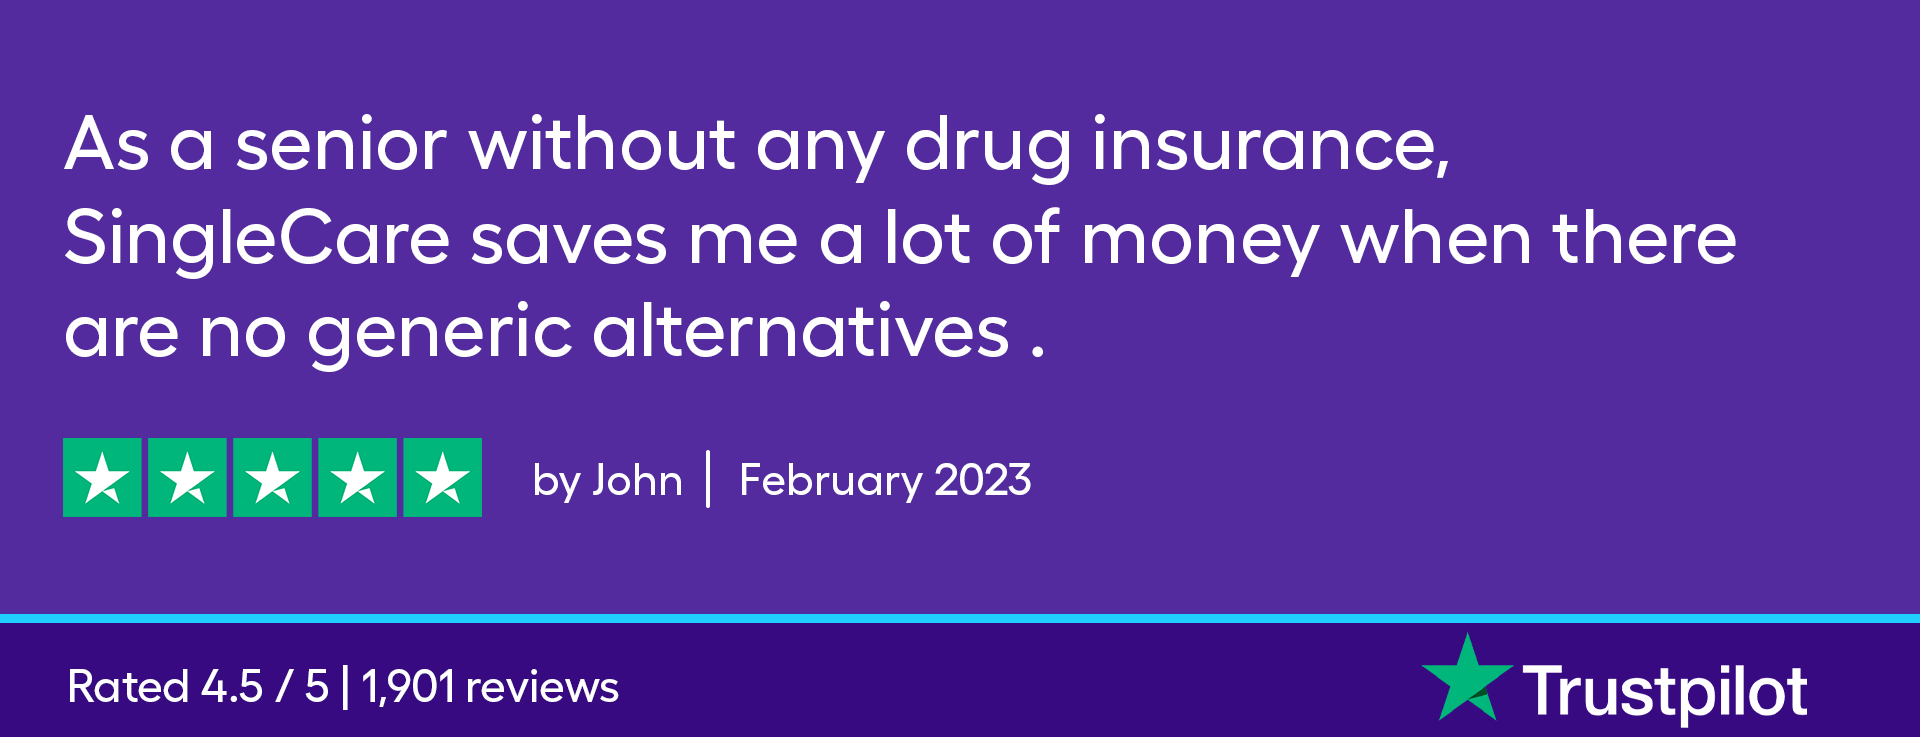 As a senior without any drug insurance, SingleCare saves me a lot of money when there are no generic alternatives. 